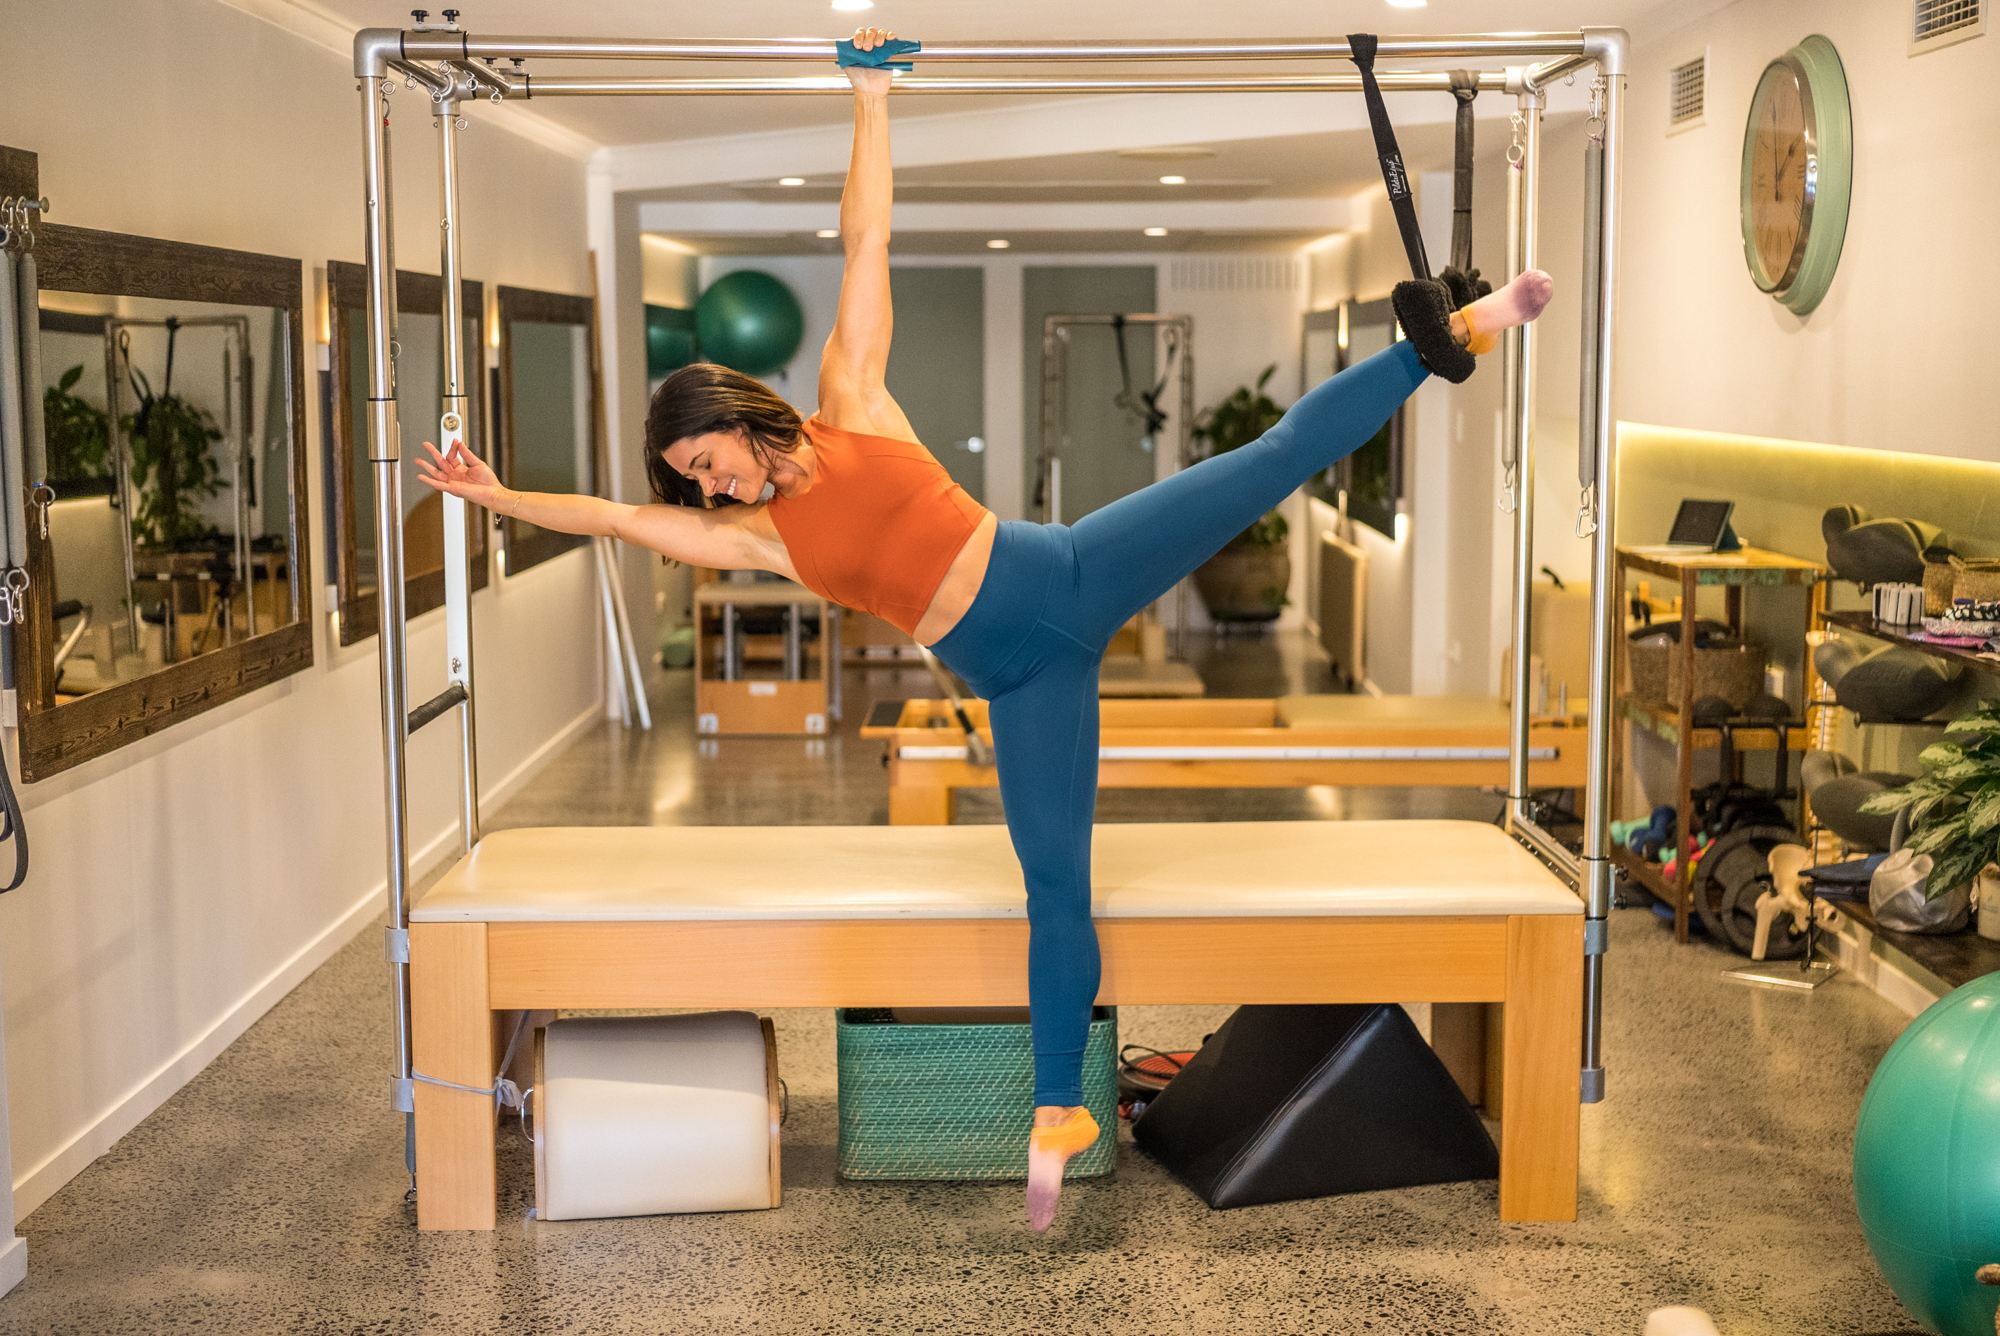 Luisa Saiter Lins, Plank Pilates owner, on the Trap Table